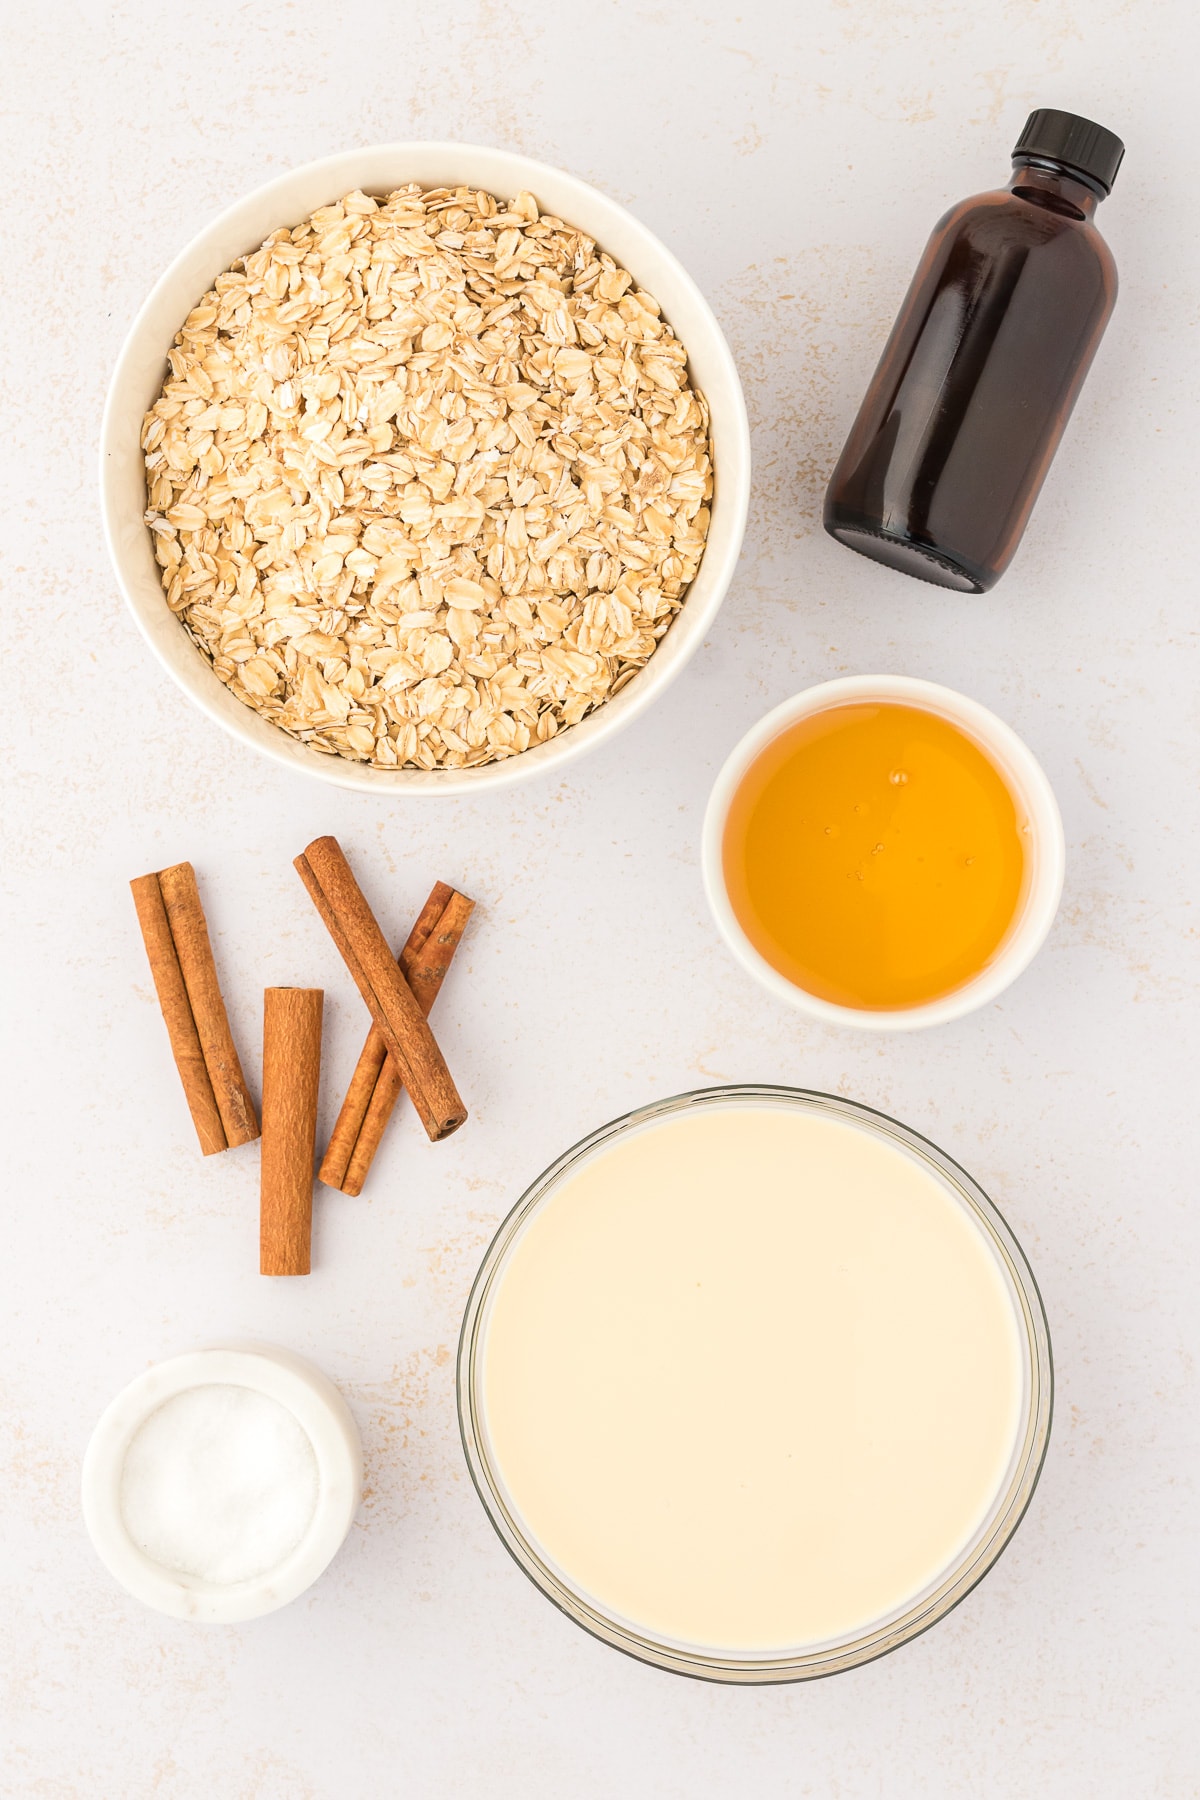 Ingredients for Mexican oatmeal breakfast, including old fashioned oats, cinnamon sticks, evaporated milk, honey, and vanilla with a dash of salt